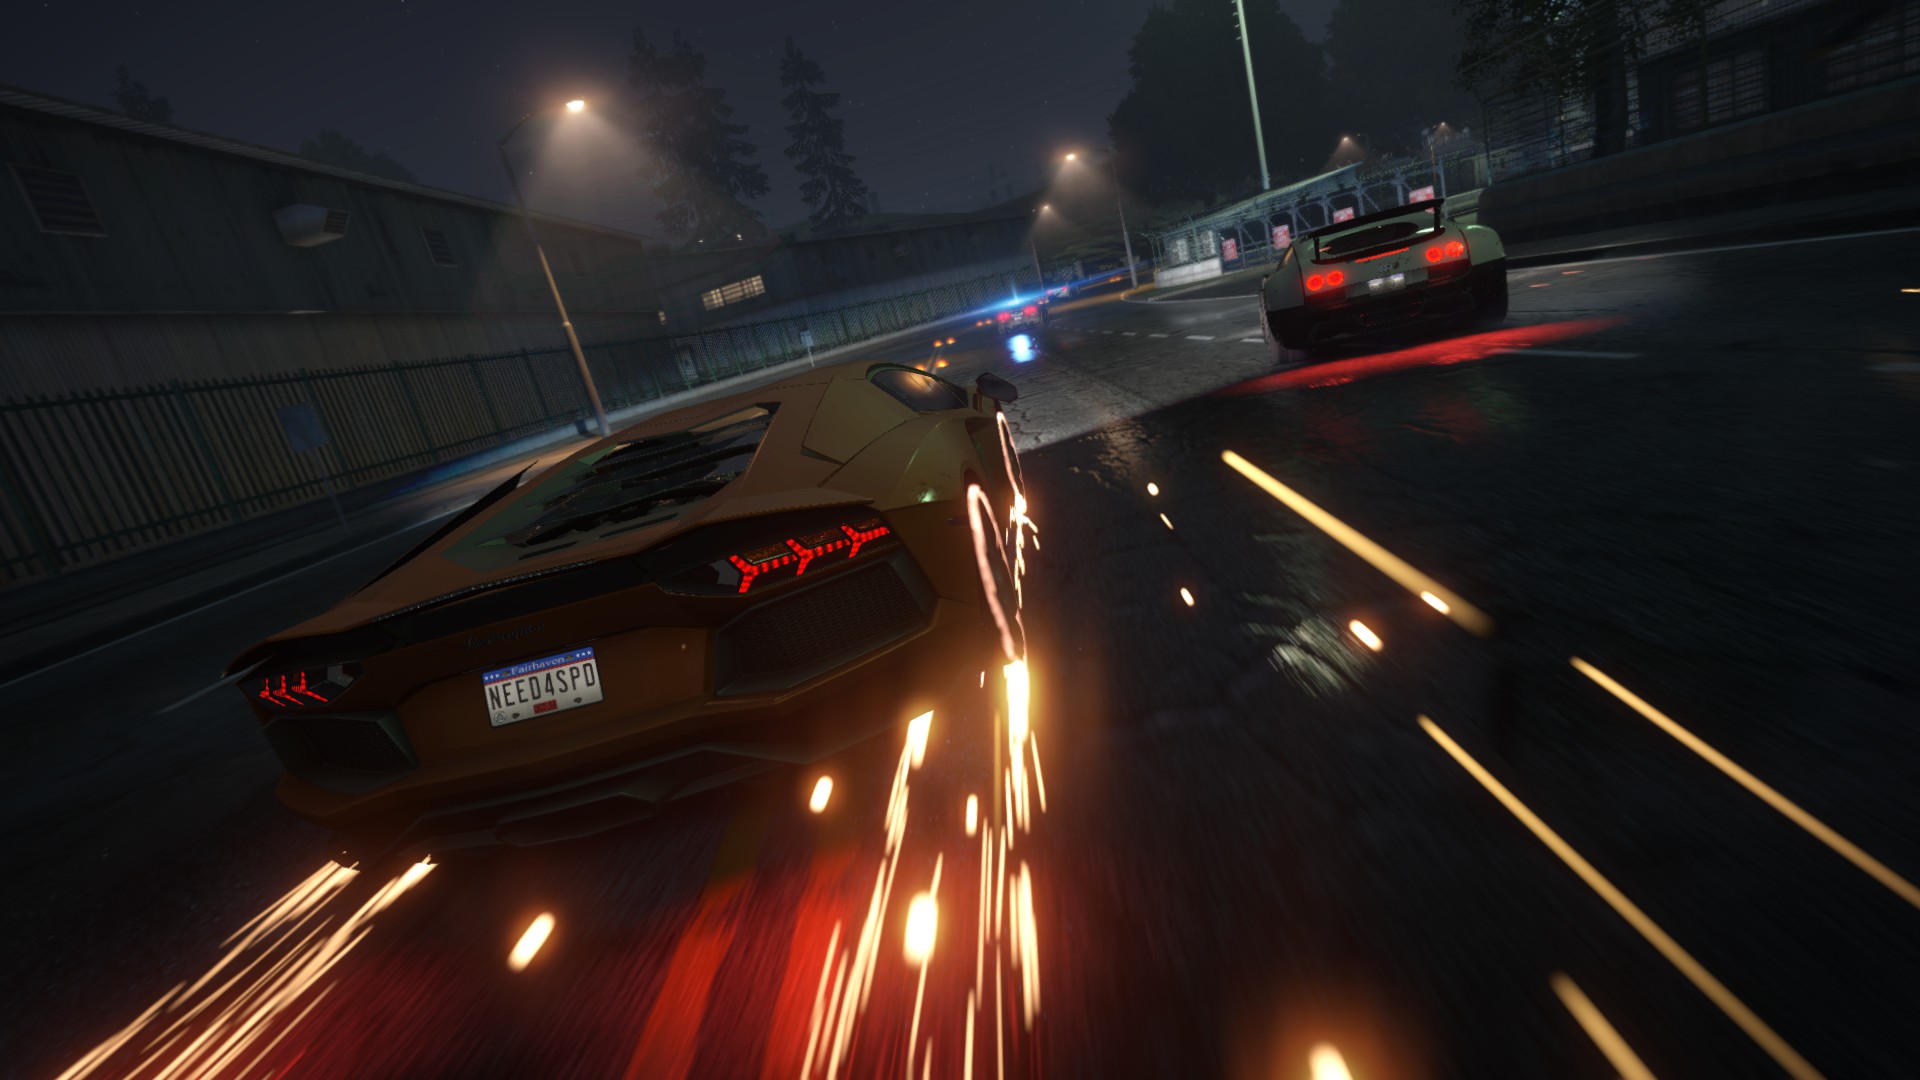 General 1920x1080 Need for Speed Need for Speed: Most Wanted Lamborghini Bugatti Lamborghini Aventador Bugatti Veyron Hypercar italian cars French Cars Volkswagen Group car Electronic Arts vehicle video games taillights licence plates night street light driving road video game art screen shot sparks